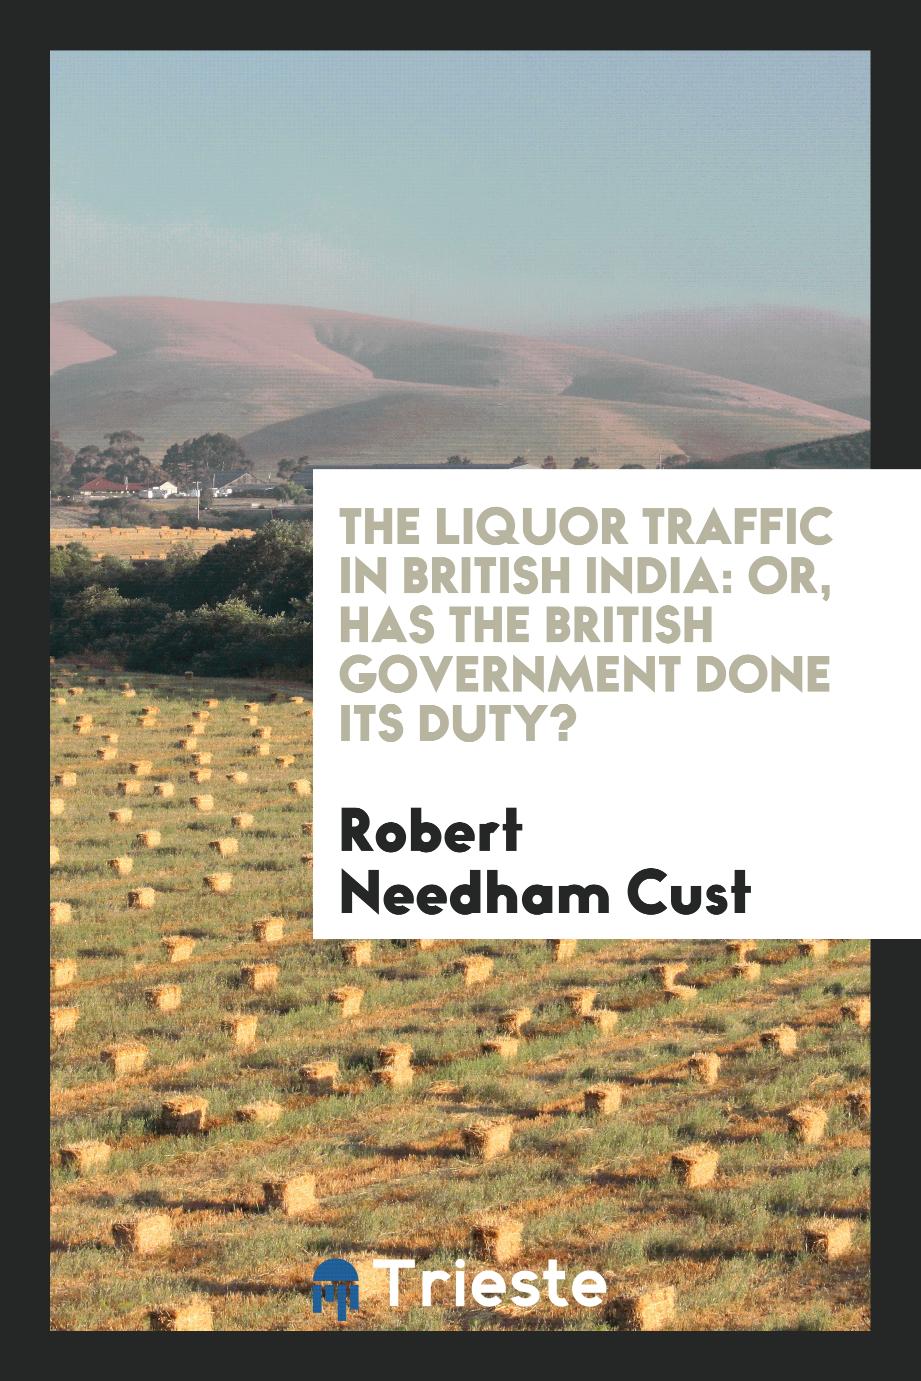 The Liquor Traffic in British India: Or, Has the British Government Done Its duty?